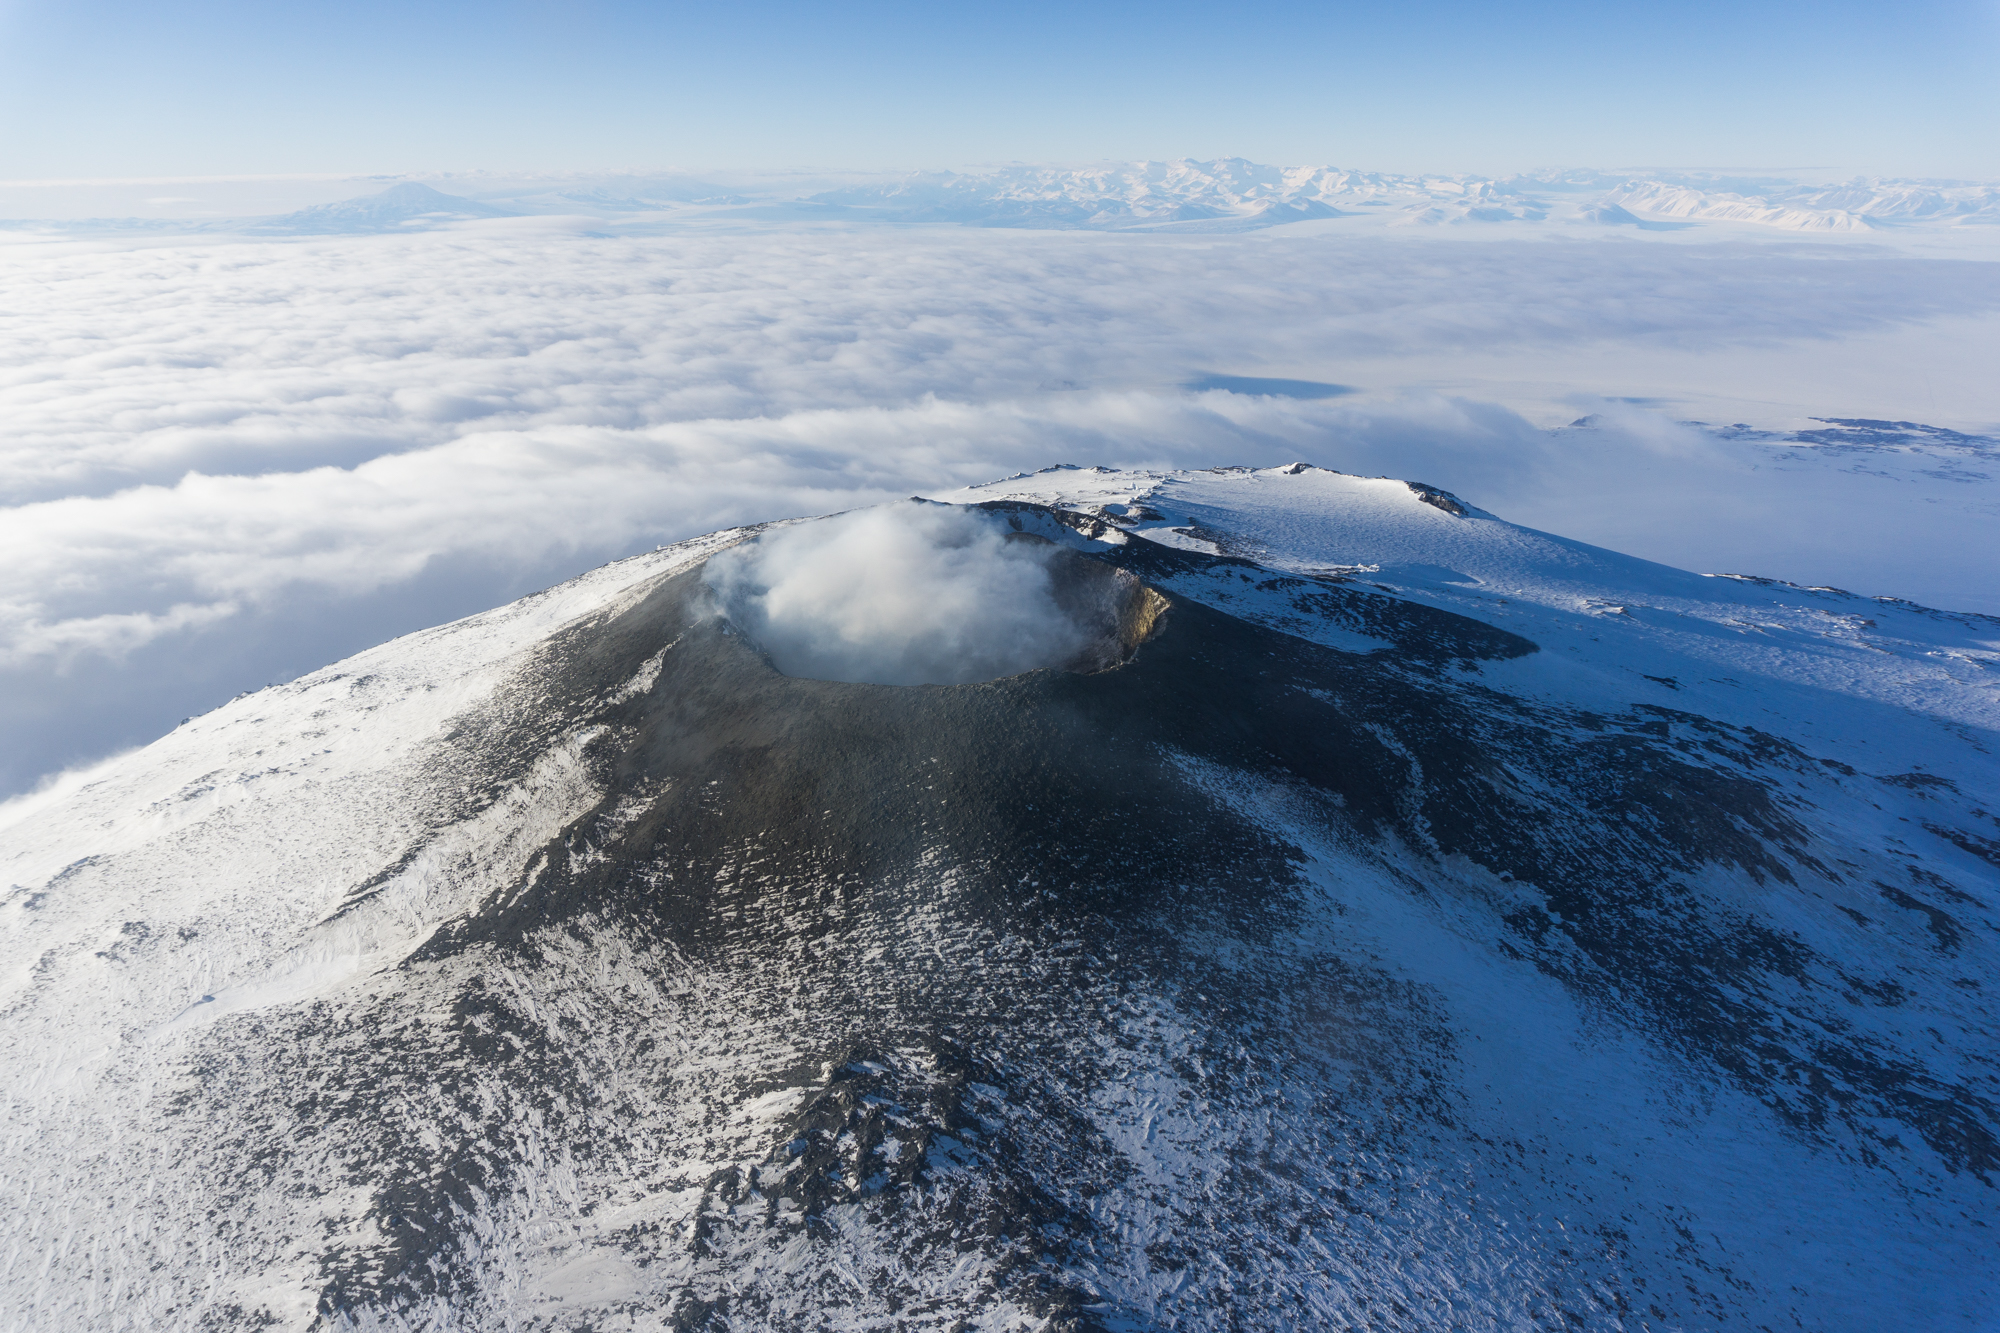 PHOTO: The crater of Mount Erebus is viewed from helicopter as steam is emitted from the molten lava lake a few hundred feet beneath the crater rim. In the background are the Transantarctic Mountains, one of the longest mountain chains in the world. 